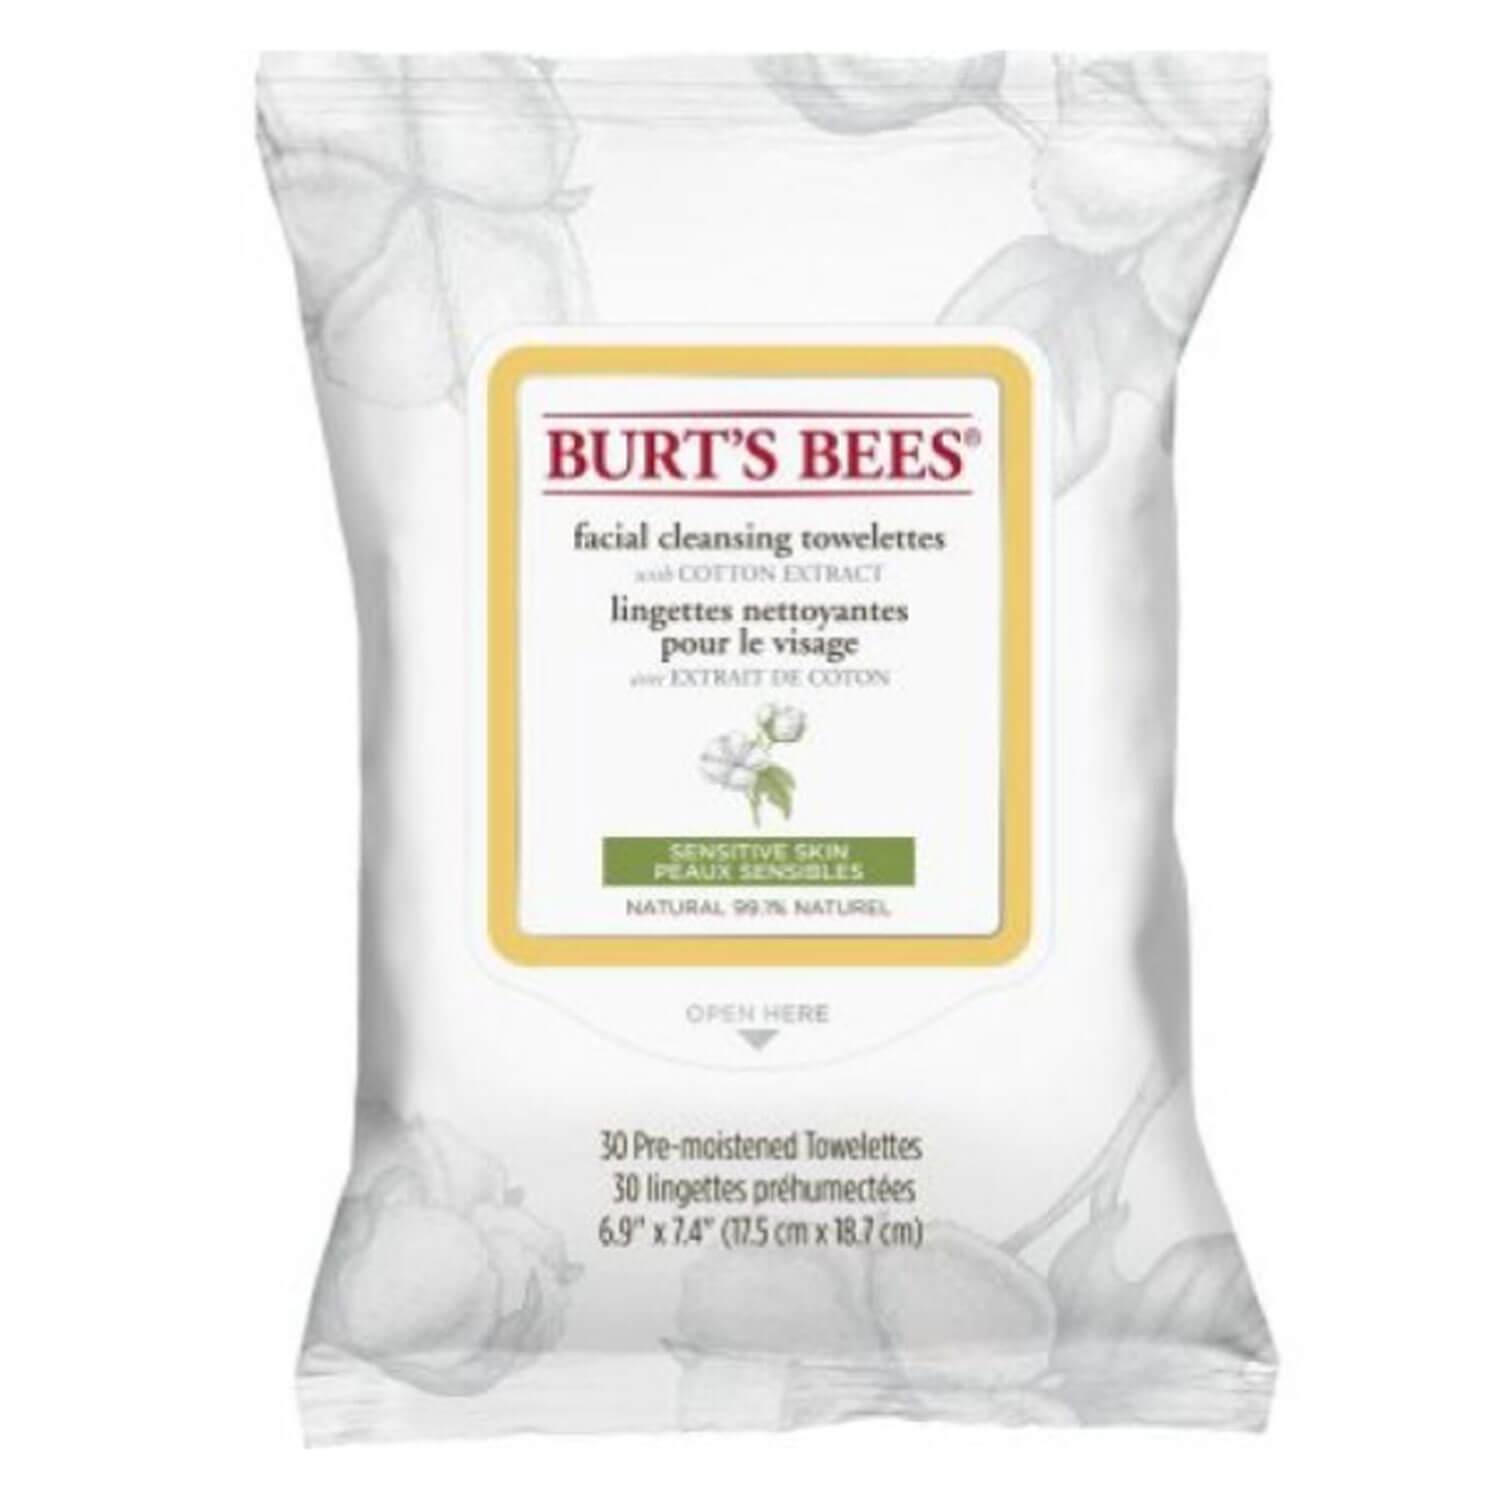 Burt's Bees - Sensitive Facial Cleansing Towelettes Cotton Extract